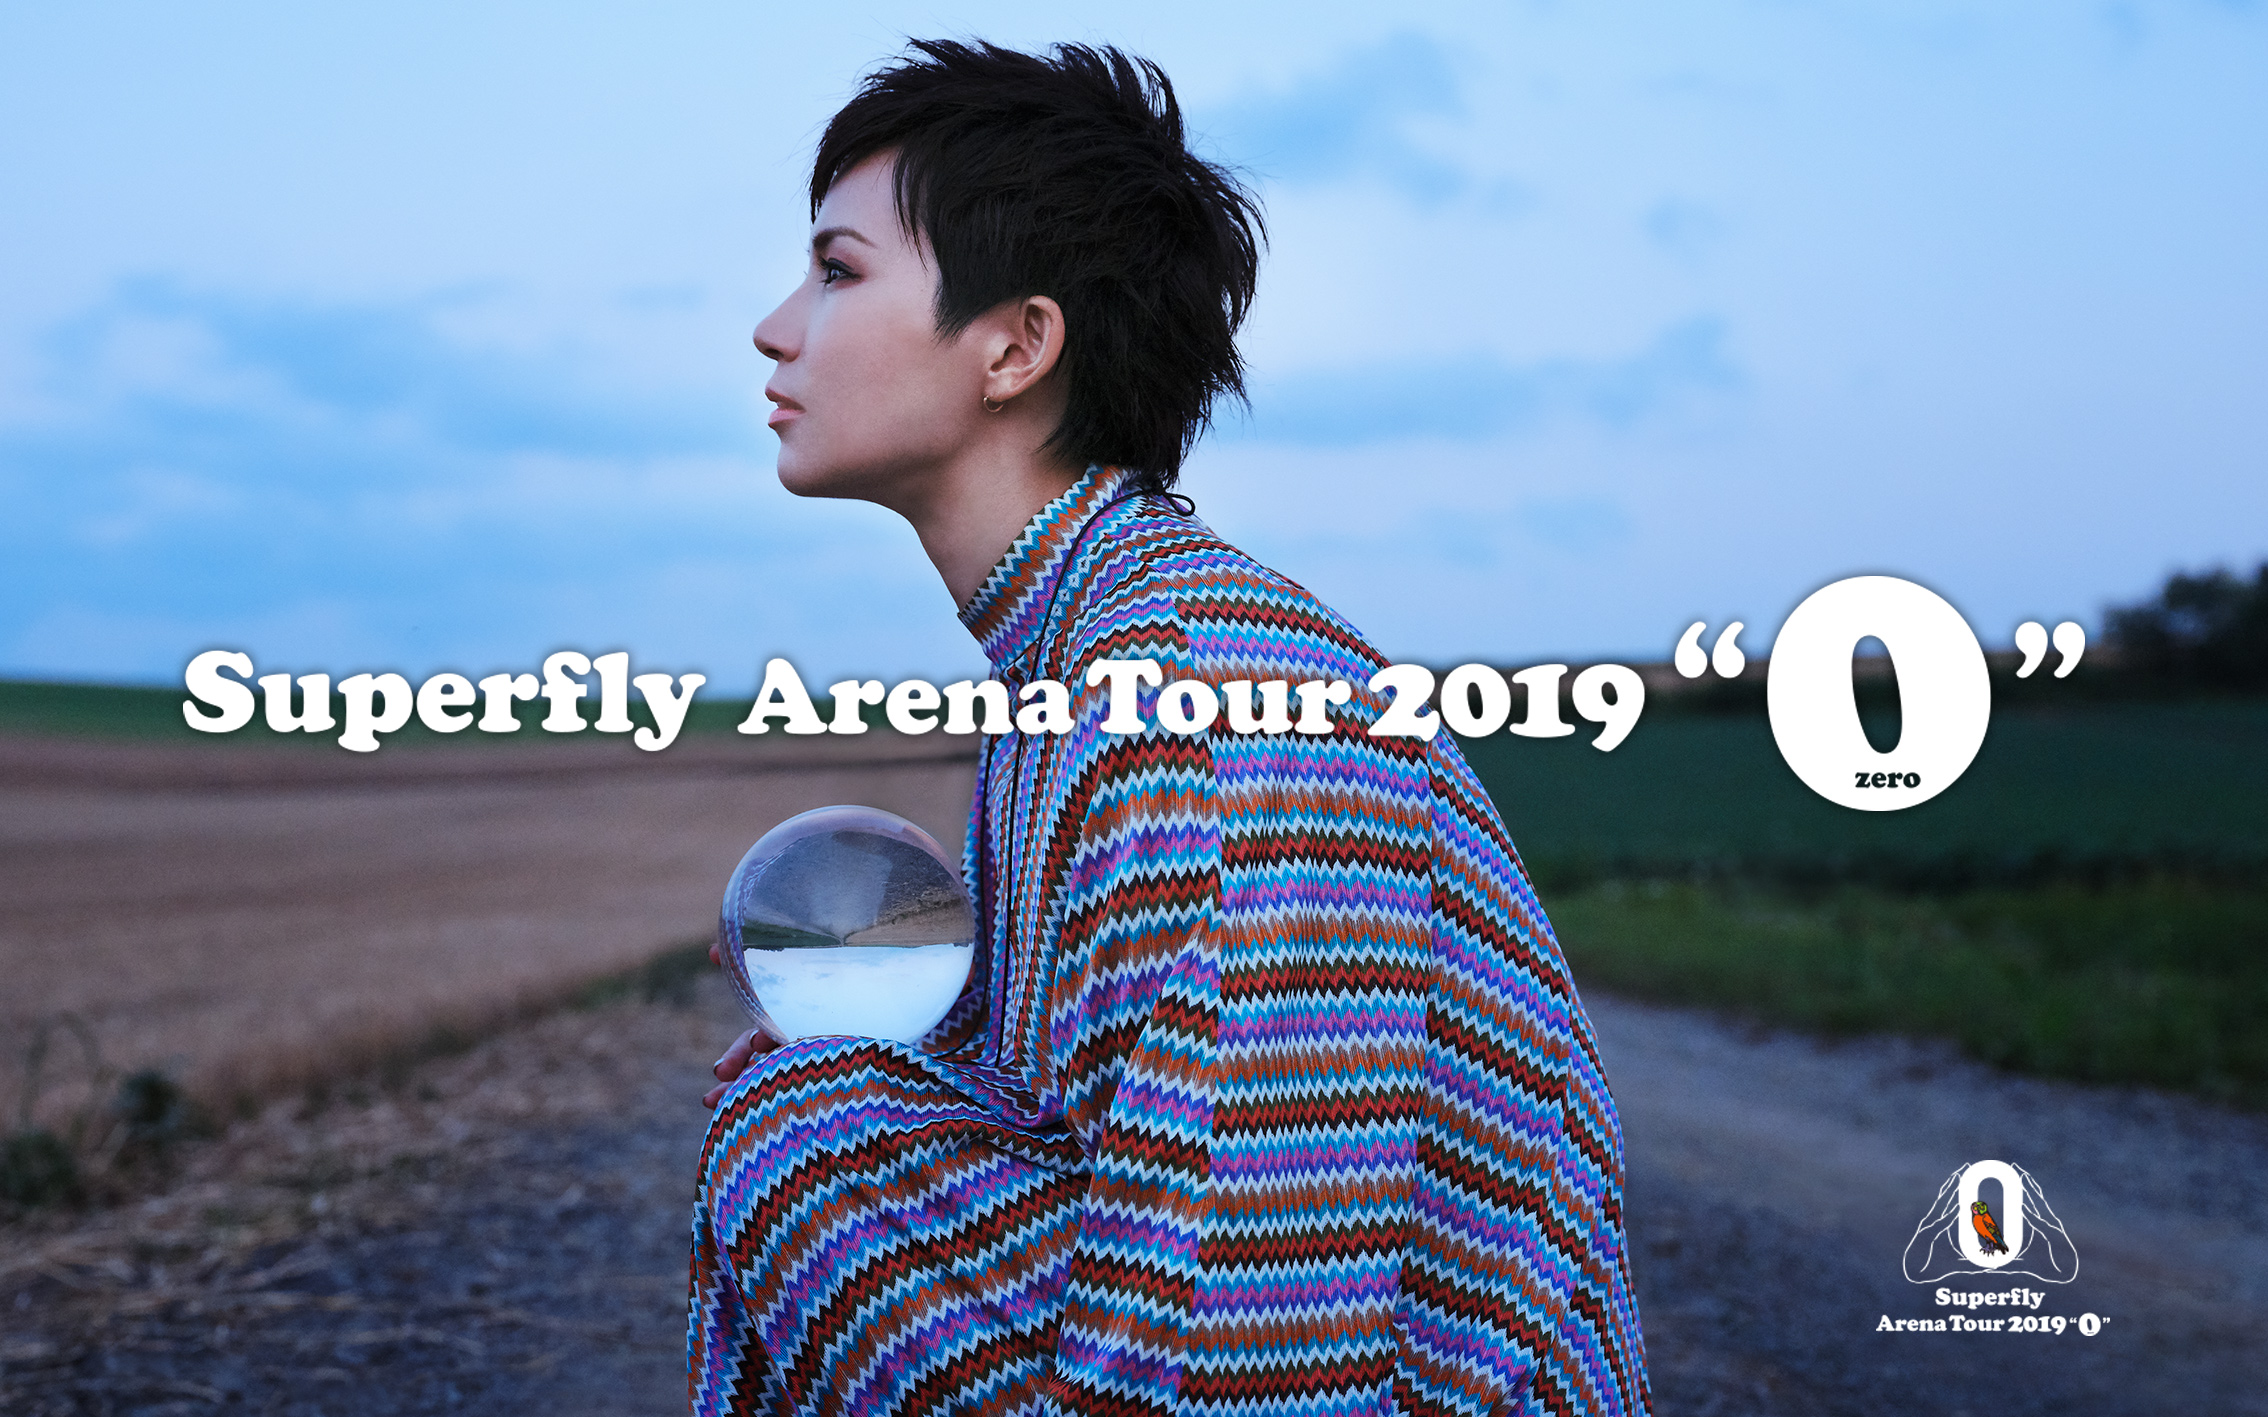 Superfly Arena Tour 2019 “0”